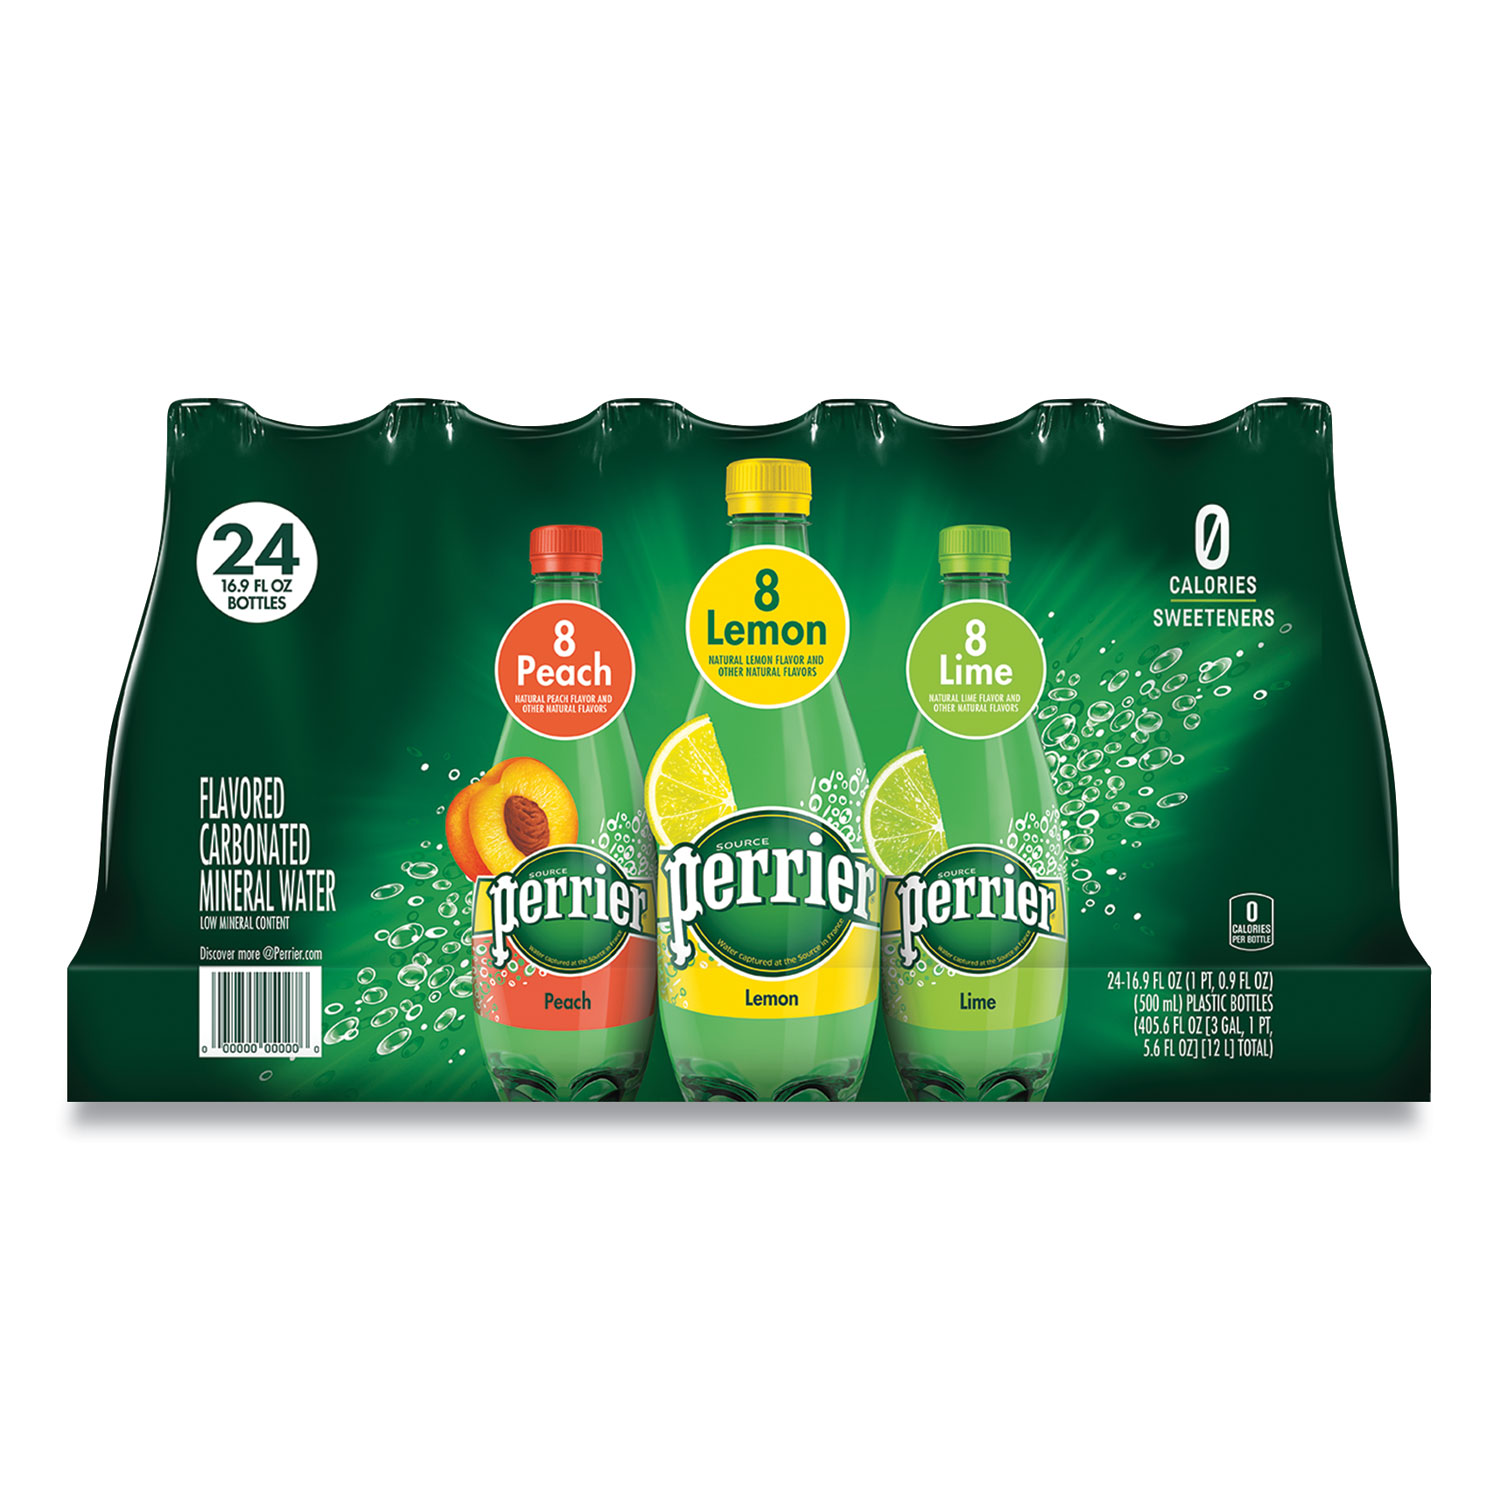 Perrier® Sparkling Natural Mineral Water, Assorted, 8 Peach, 8 Lemon, 8 Lime, 16.9 oz Bottle, 24/Pack